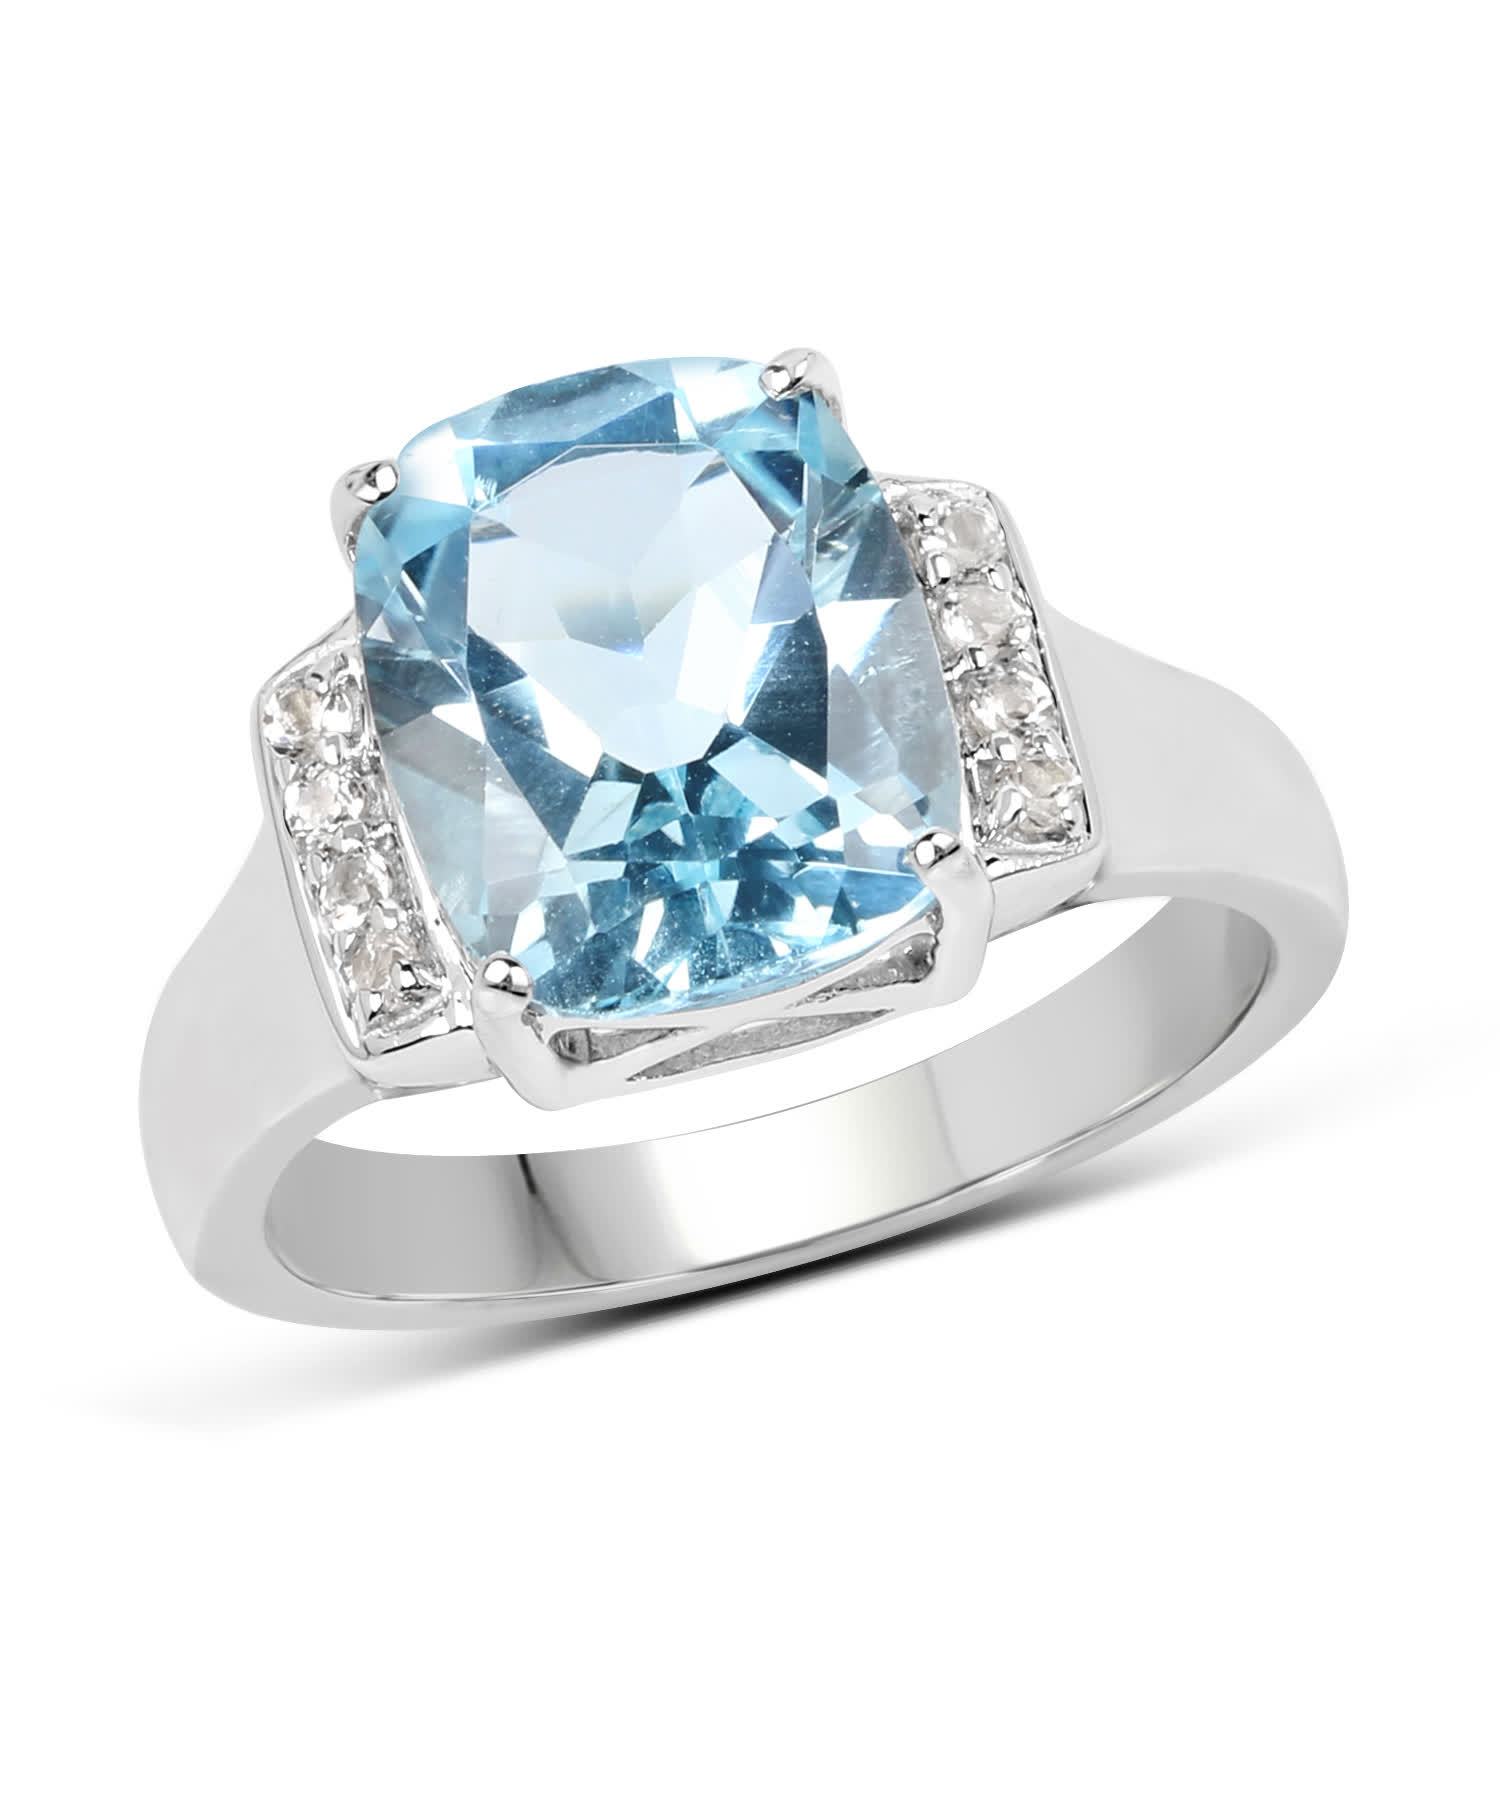 4.28ctw Natural Swiss Blue Topaz Rhodium Plated 925 Sterling Silver Ring View 1